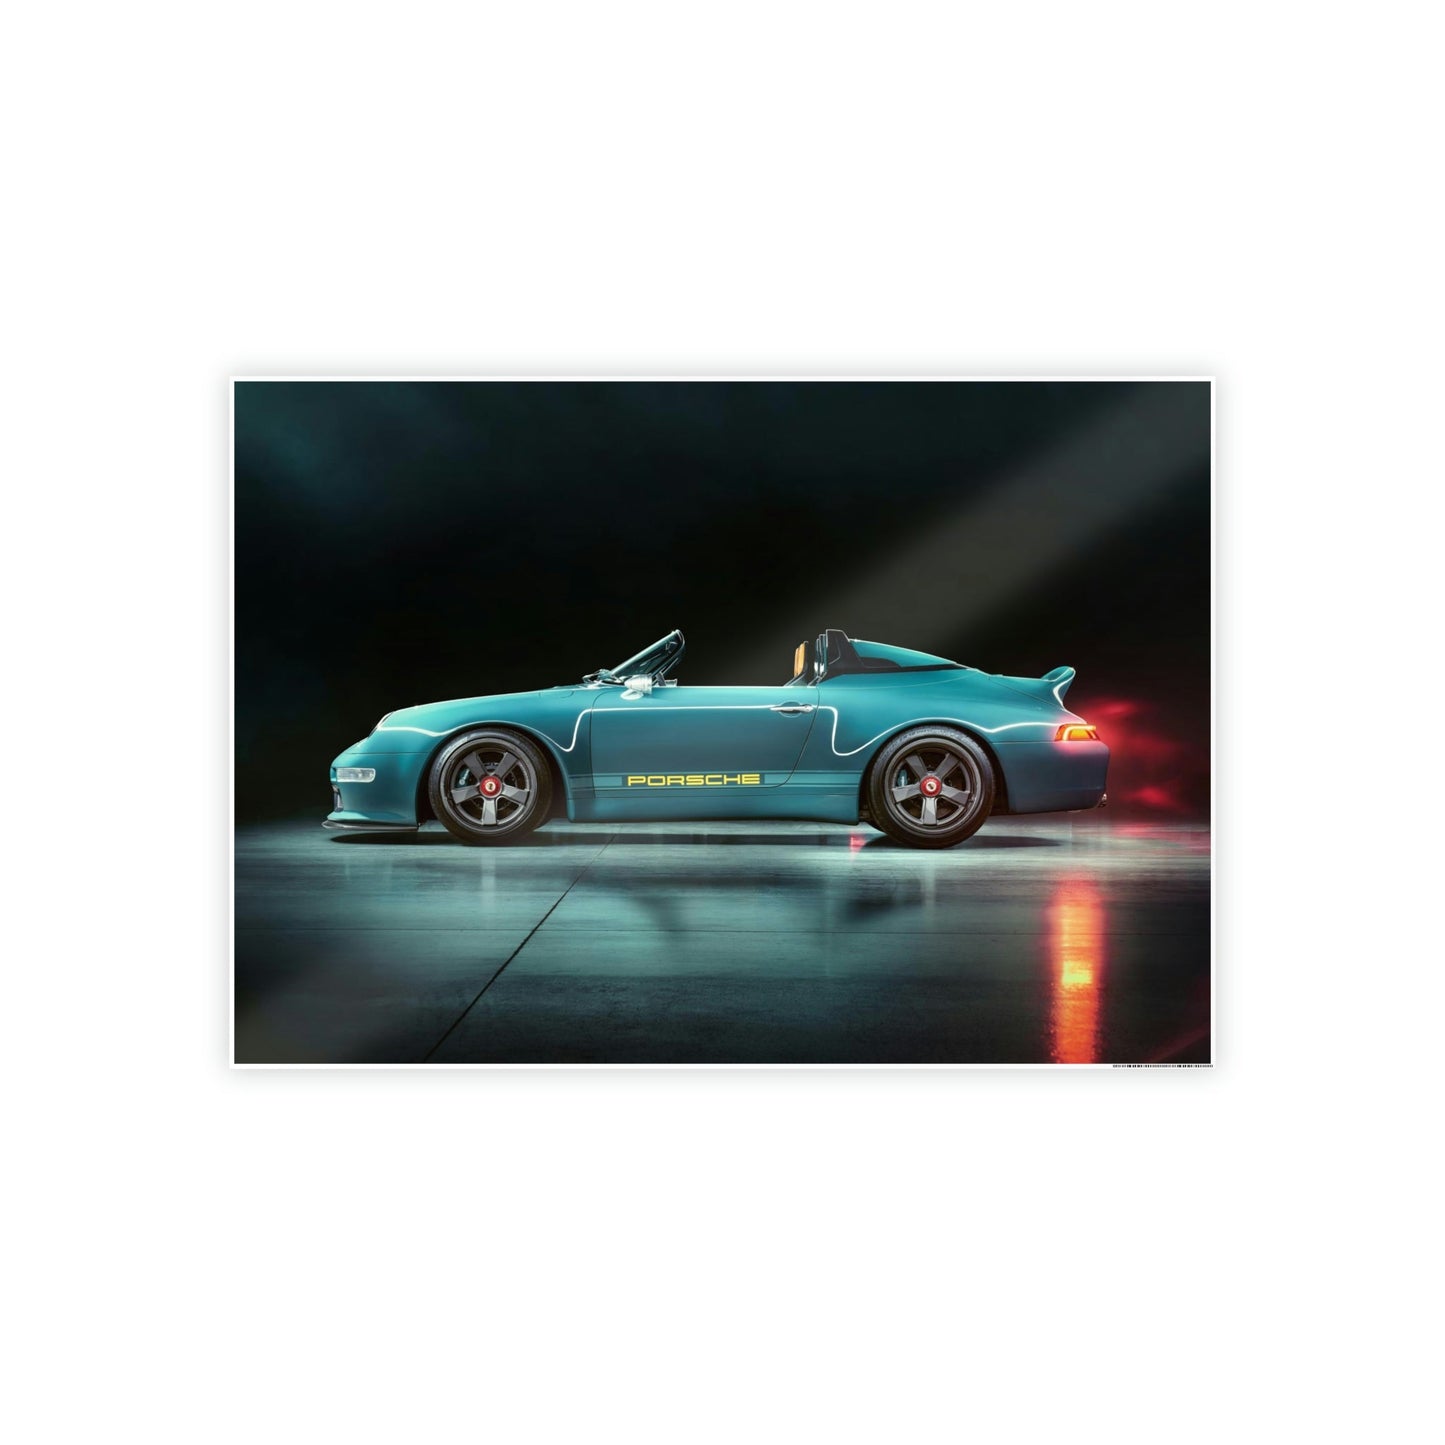 Porsche Passion: A Work of Art for Fans of This Iconic Sports Car